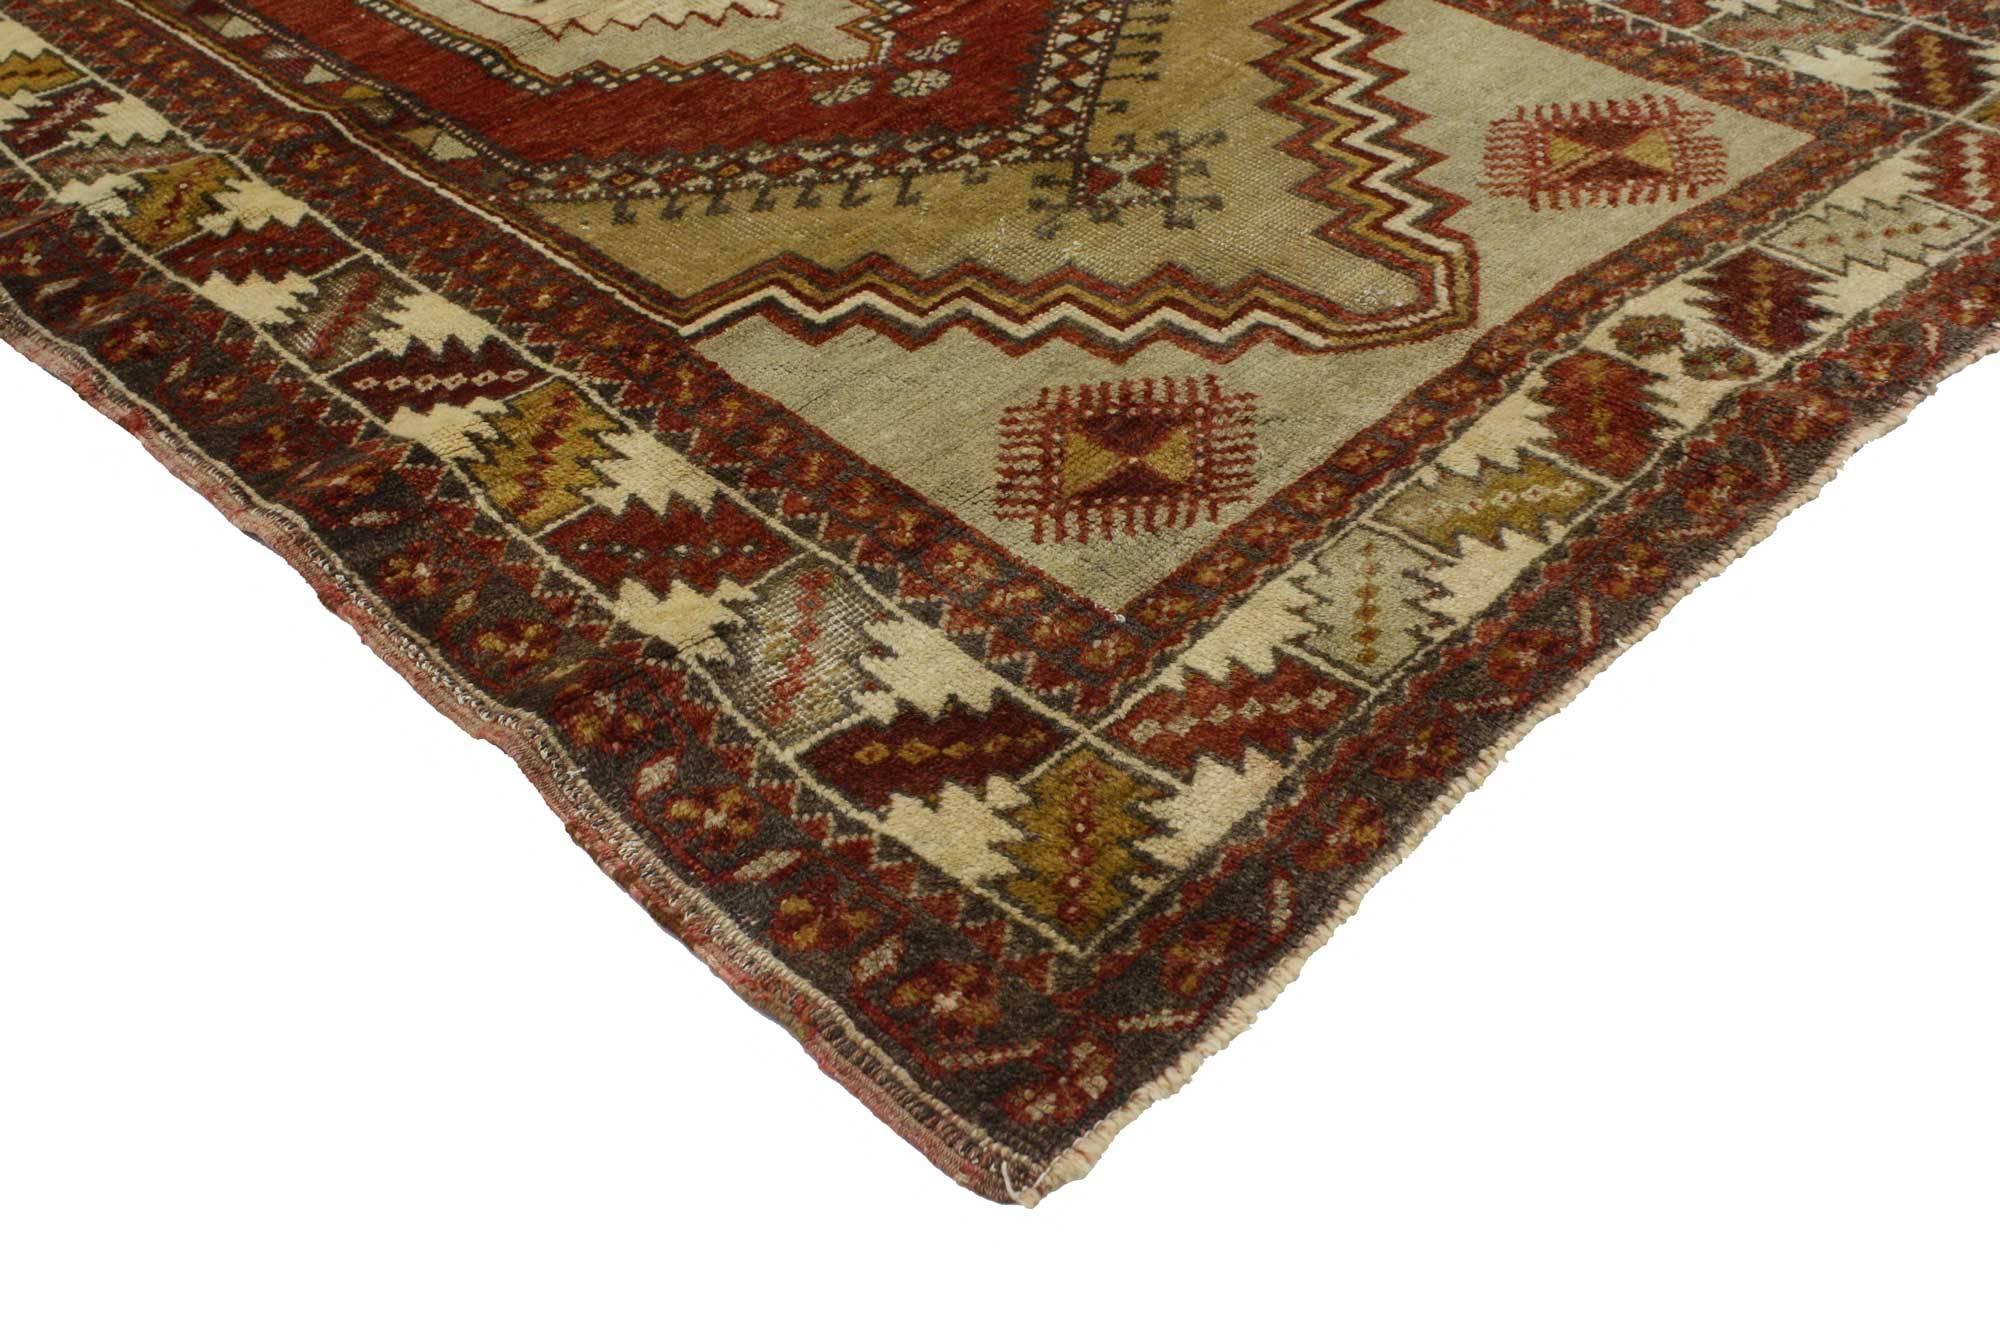 51694, vintage Turkish Oushak Accent rug with tribal style. This tribal style vintage Turkish Oushak rug is rendered in harvest colors with an expertly woven tribal motif. The Oushak accent rug features a centre amulet on a triple overlapping